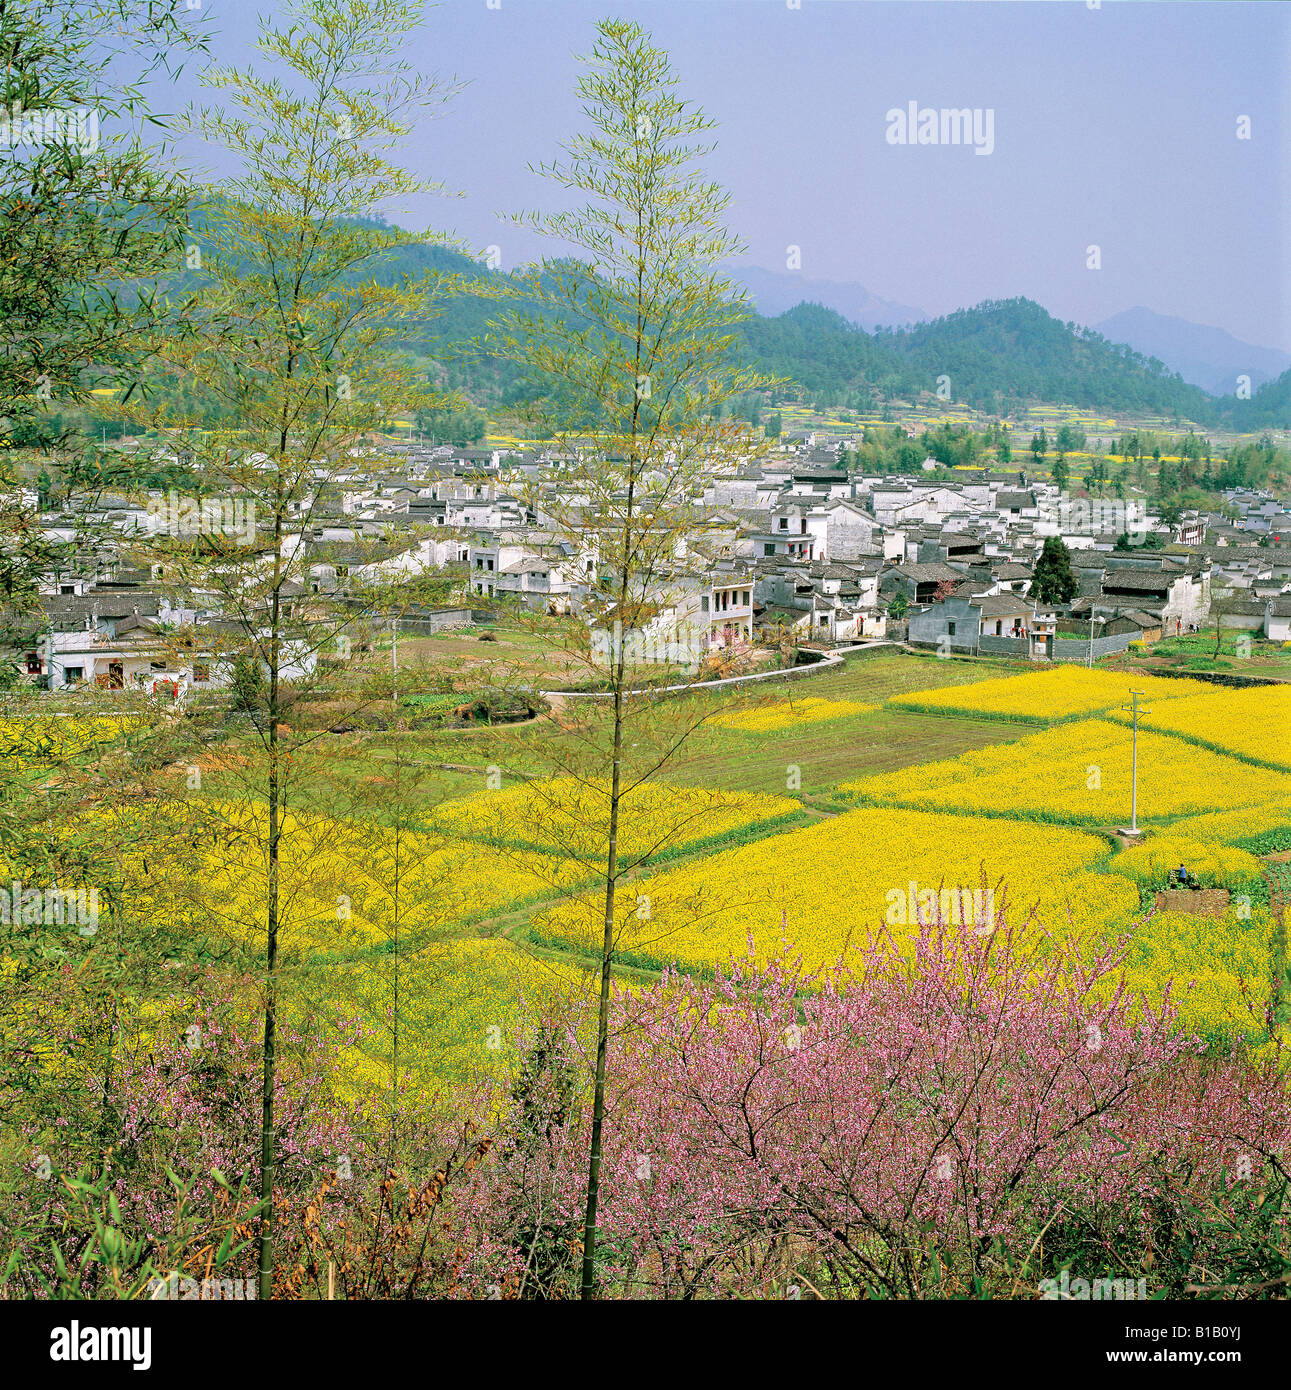 high angle view of village and field in area of ancient Huizhou,Anhui,China Stock Photo